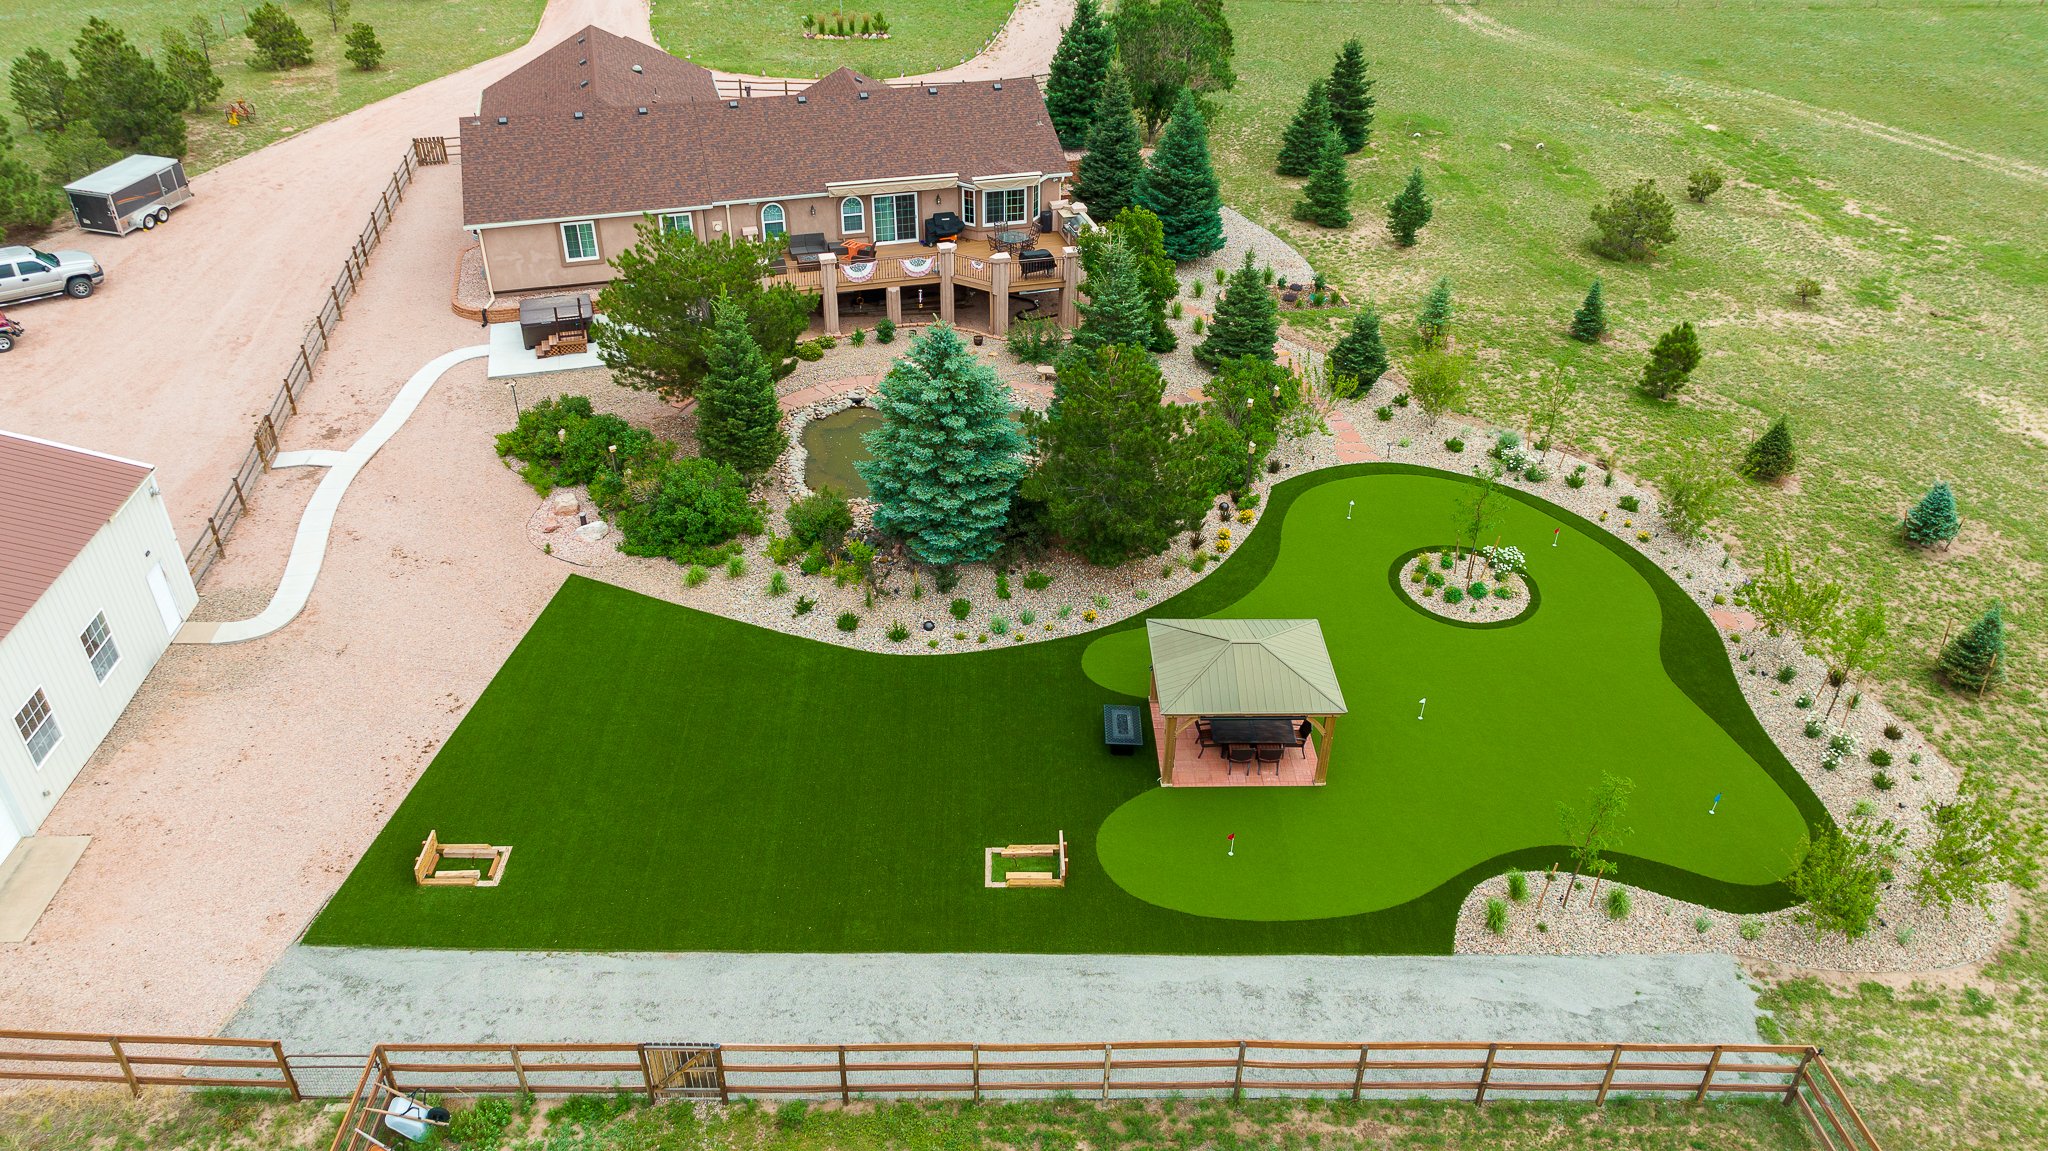 Putting greens and artificial turf in The Pinery, CO